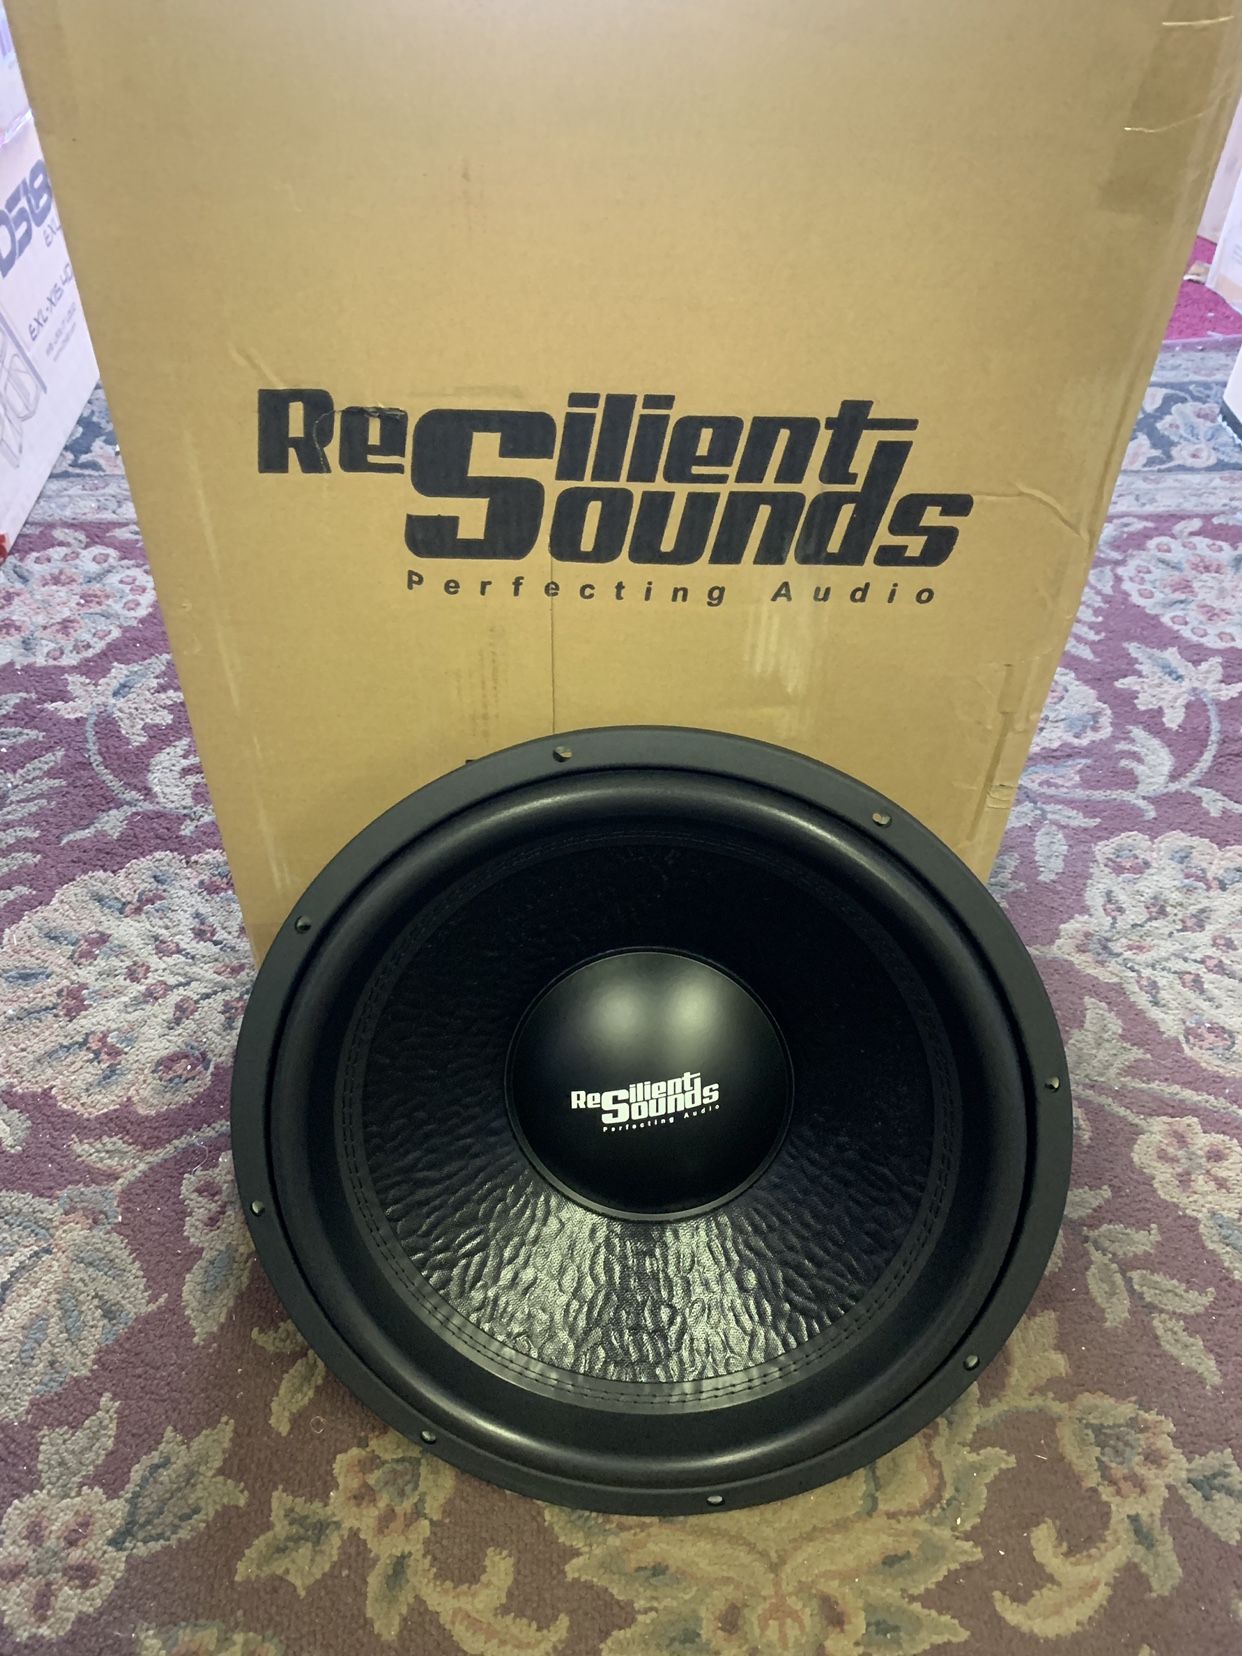 Resilient Sounds Car Audio . 15 Inch Car Stereo Subwoofer 1500 Watts Max 500 Rms New Years Super Sale . $125 Each While They Last New